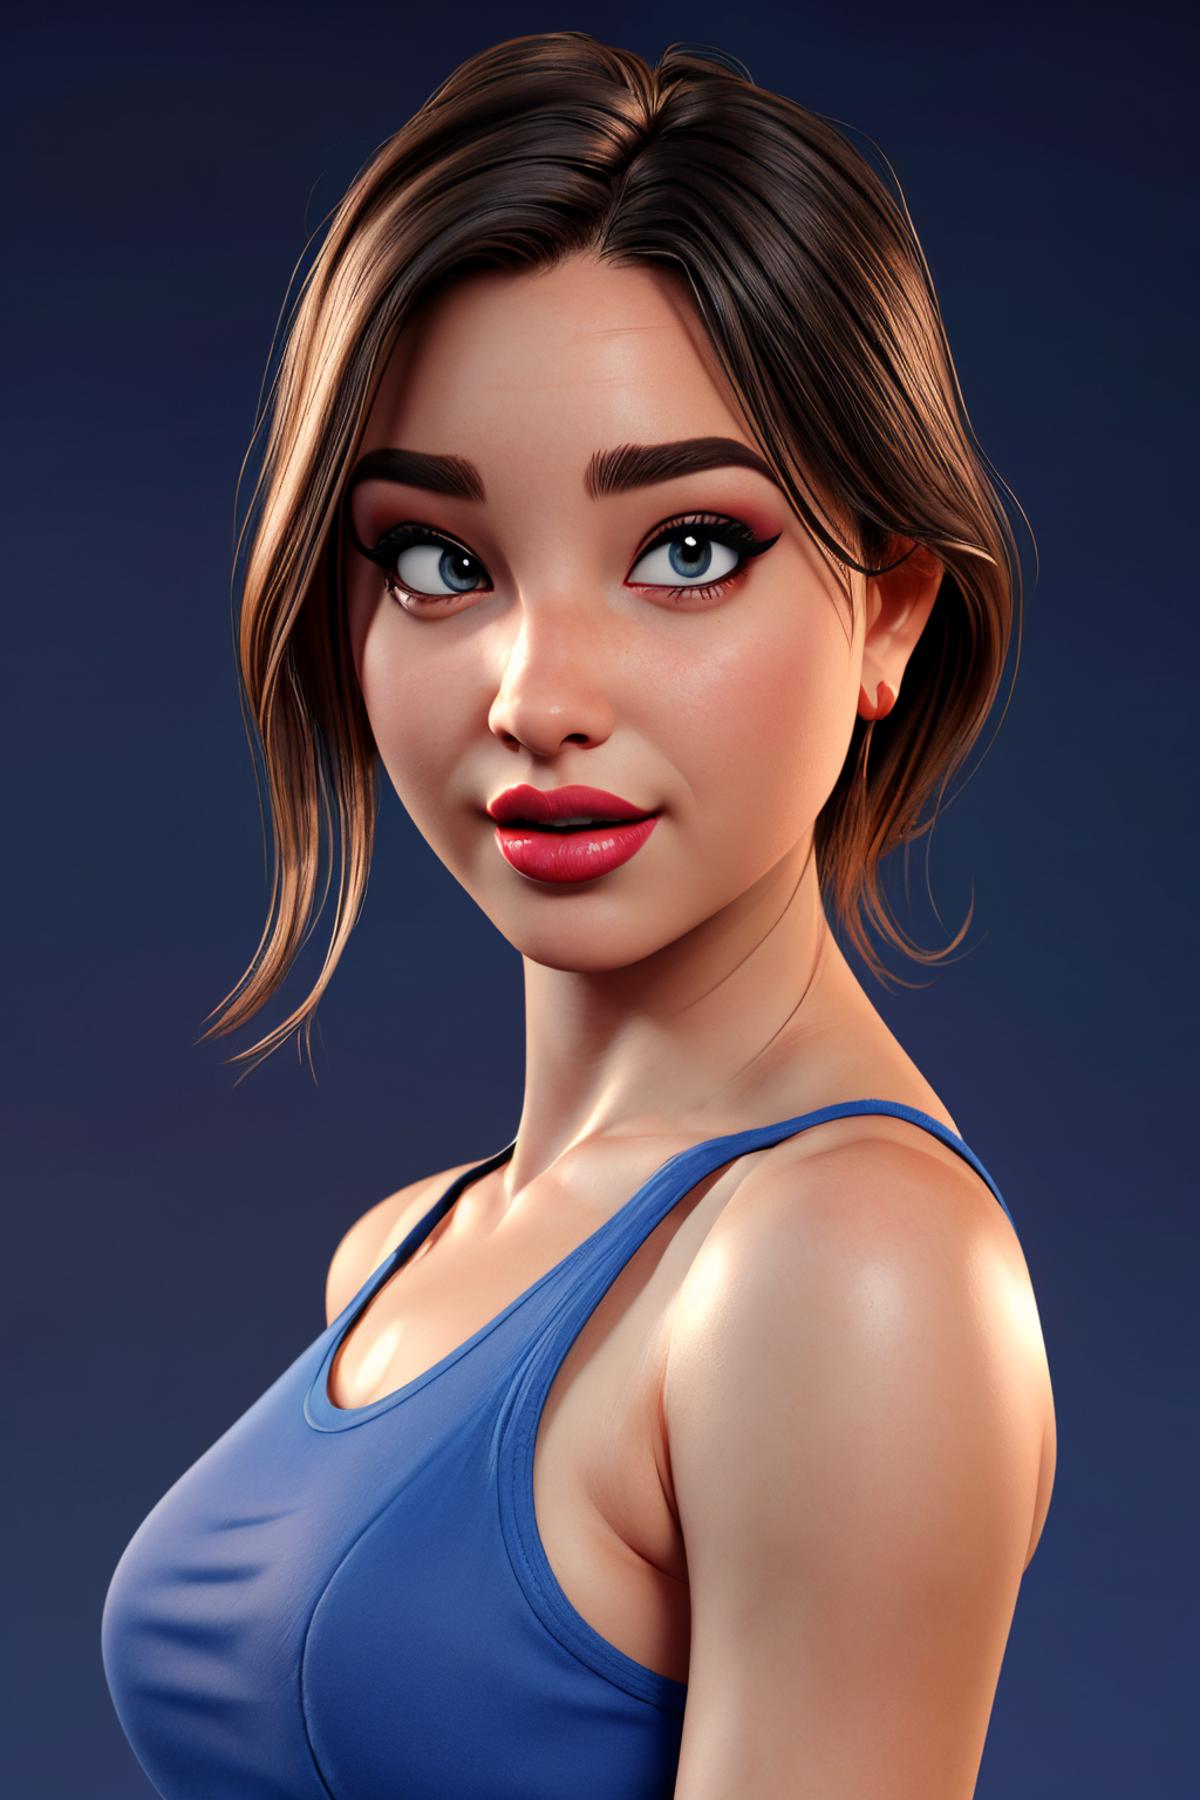 AI model image by SexyToons